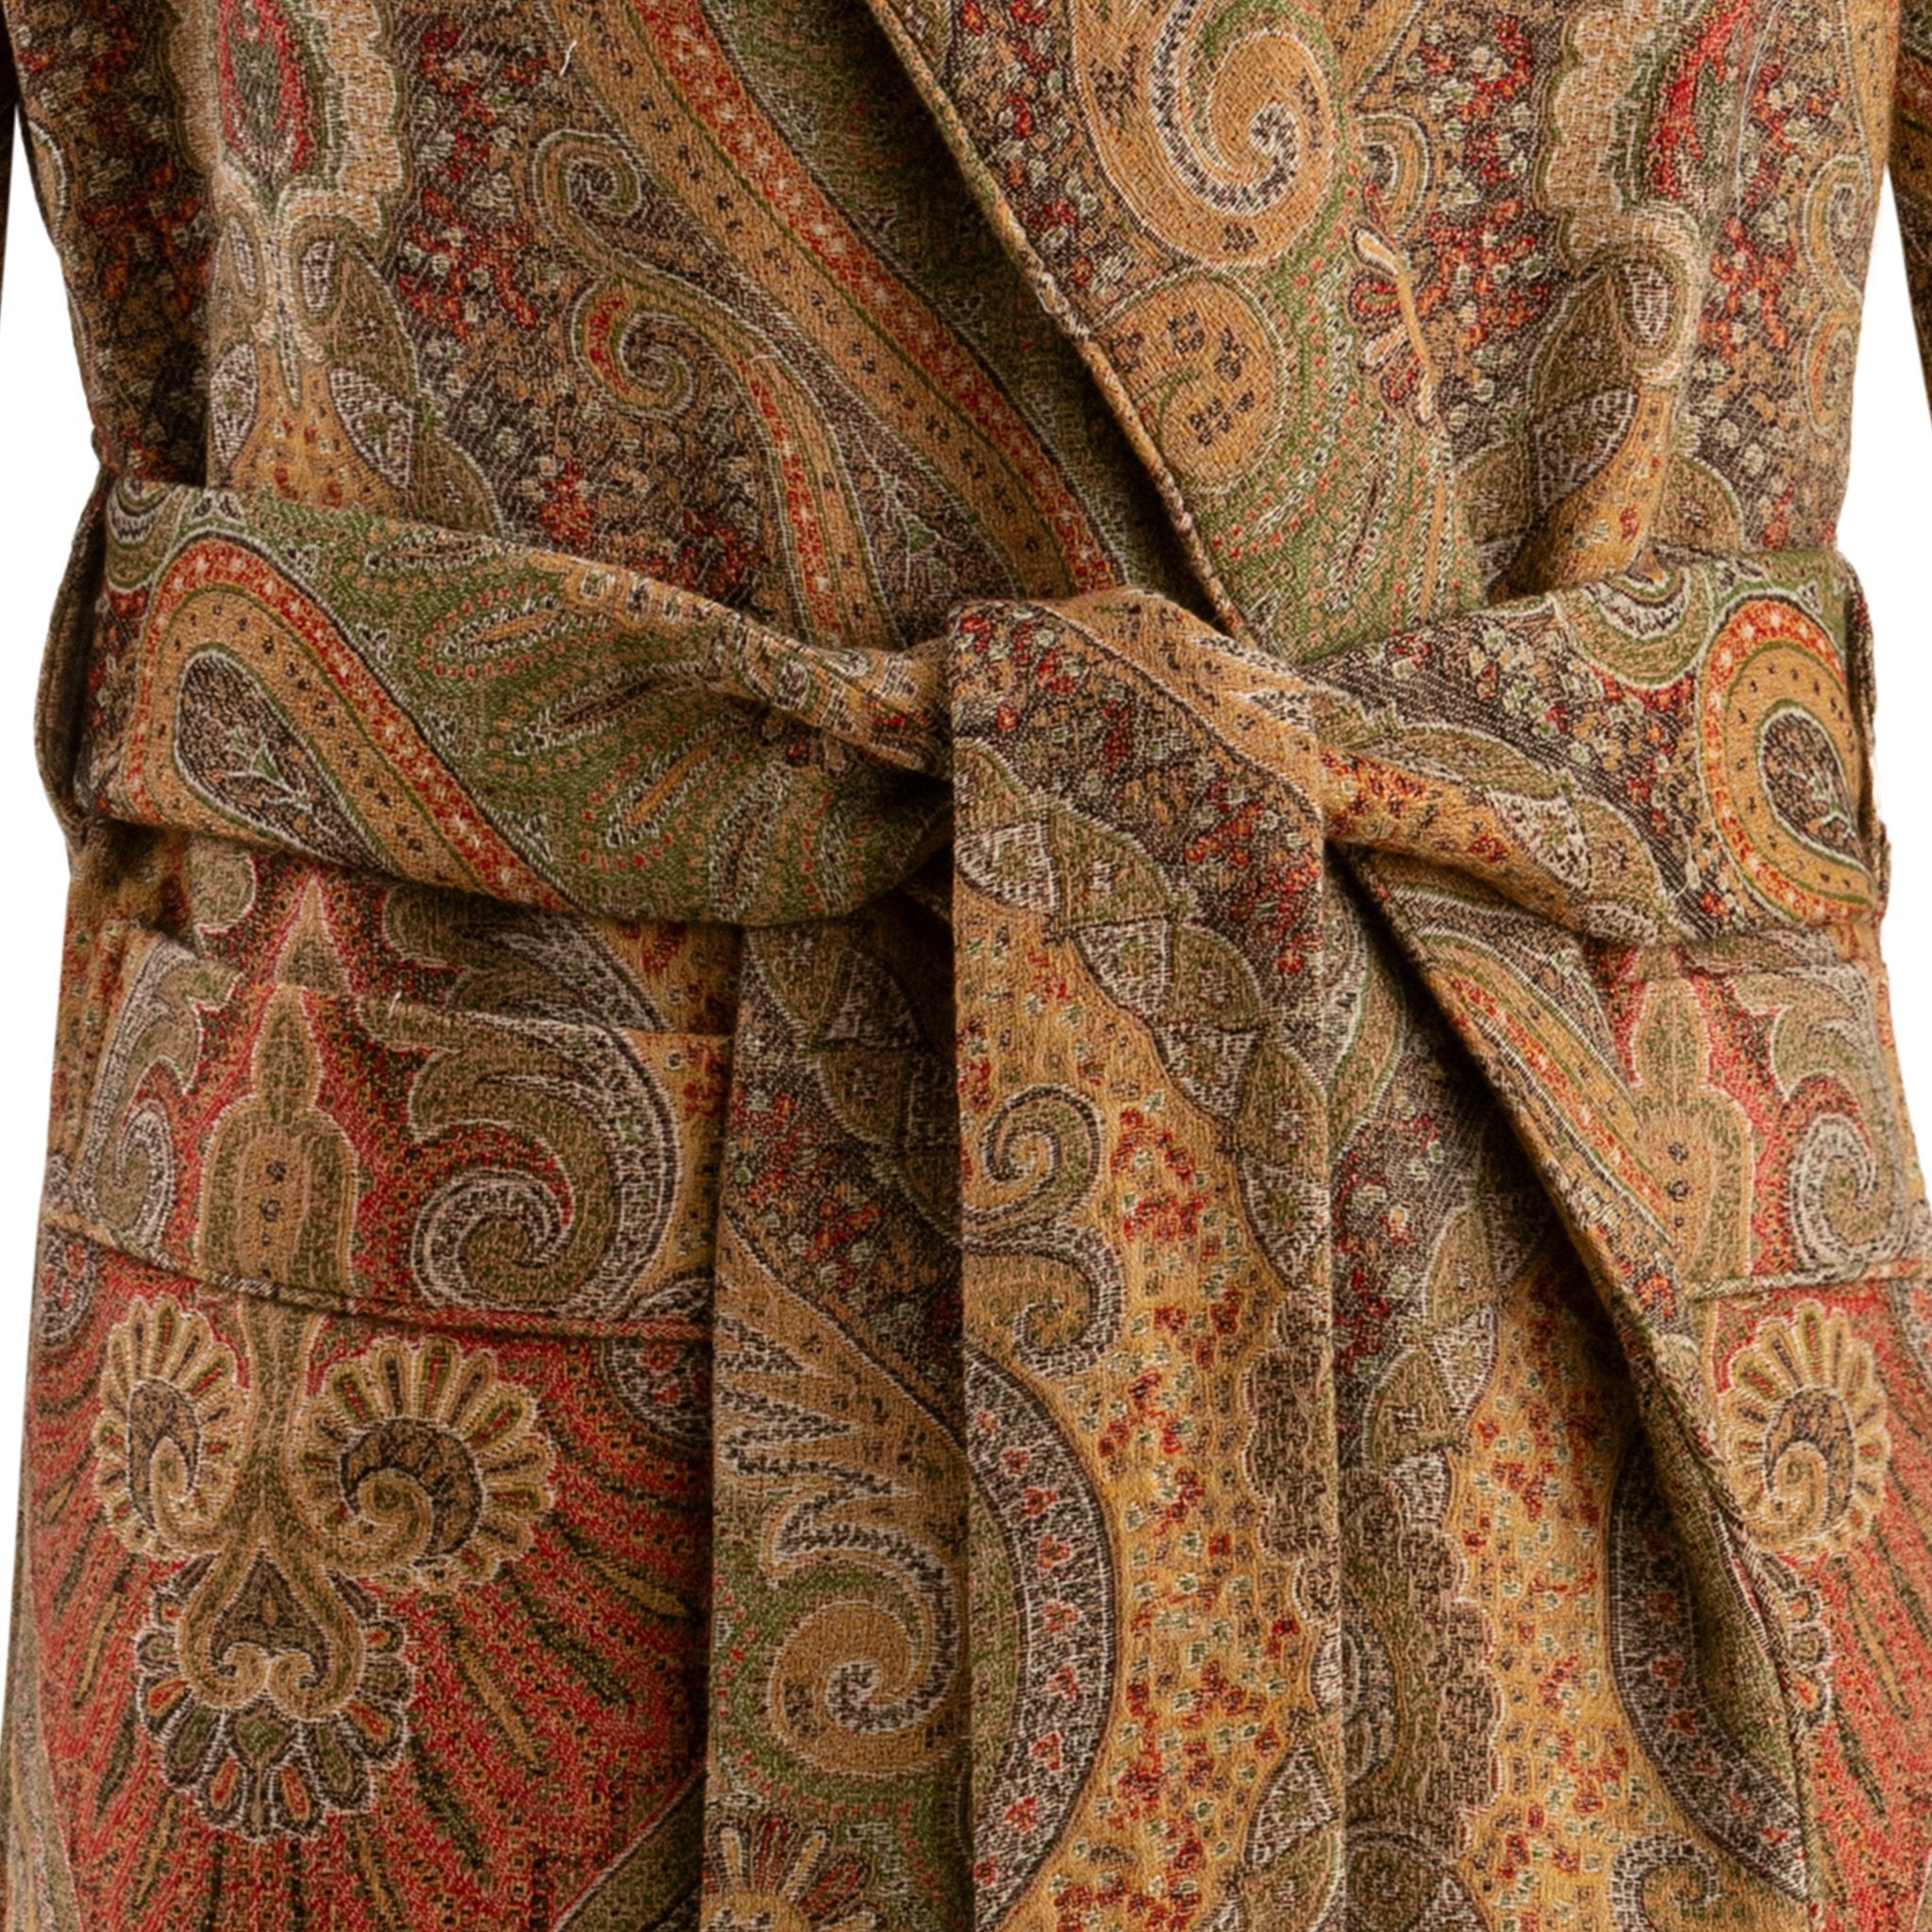 Antique Paisley Wool Dressing Gown freeshipping - Emma Willis